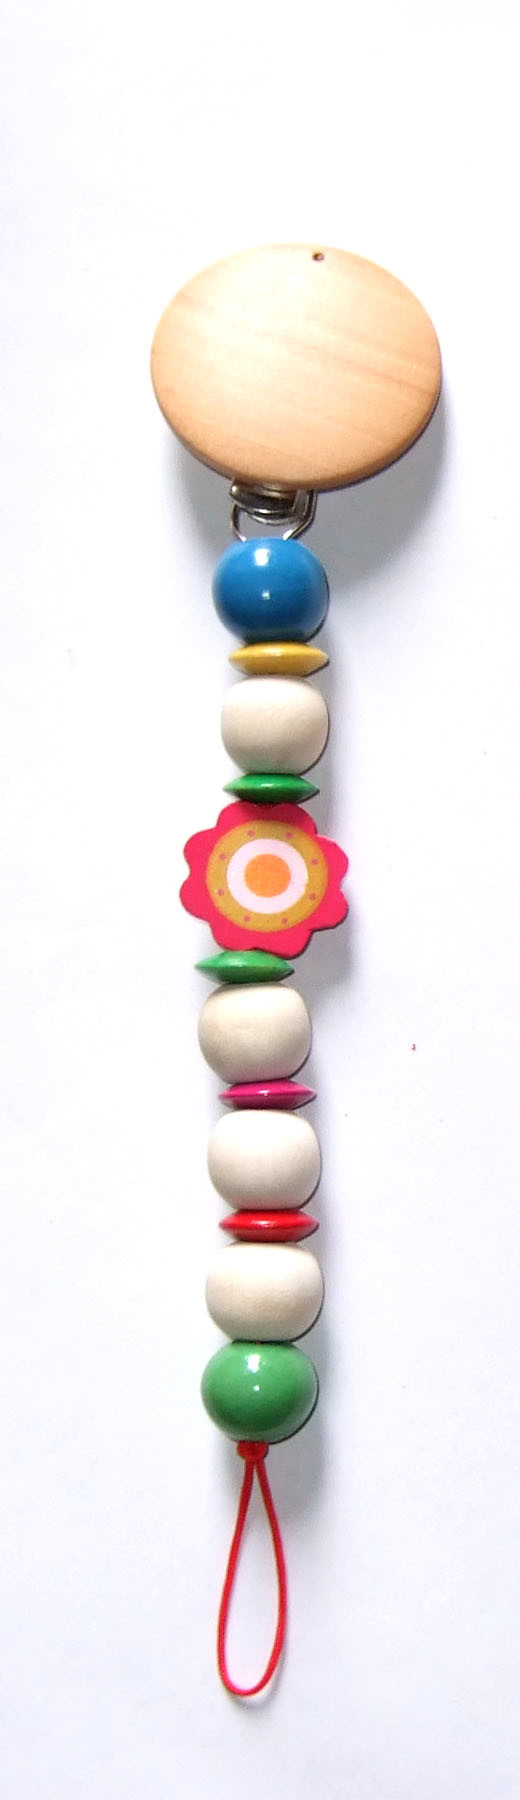 Baby Products - Baby Soother Chain (WC-001)